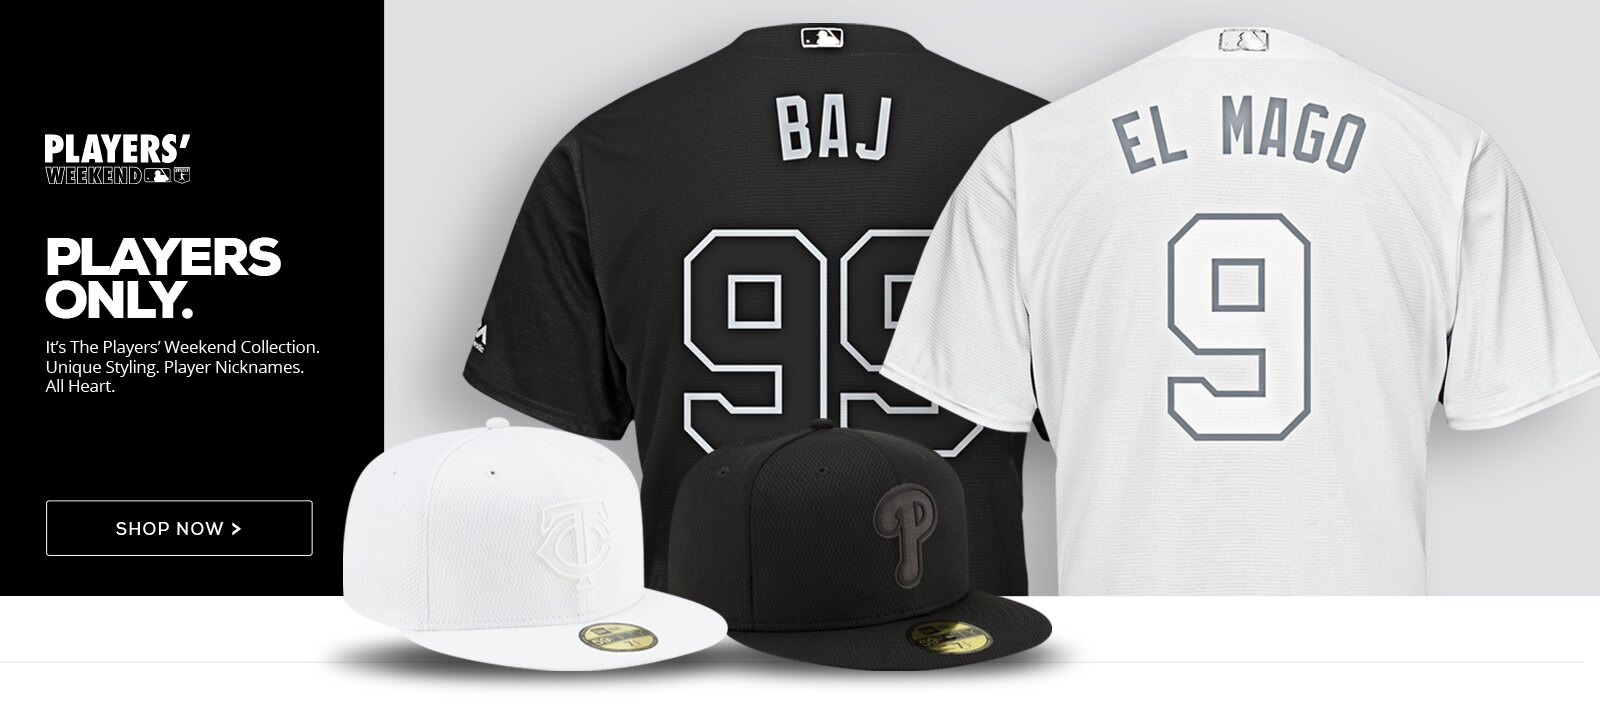 2019 players weekend uniforms